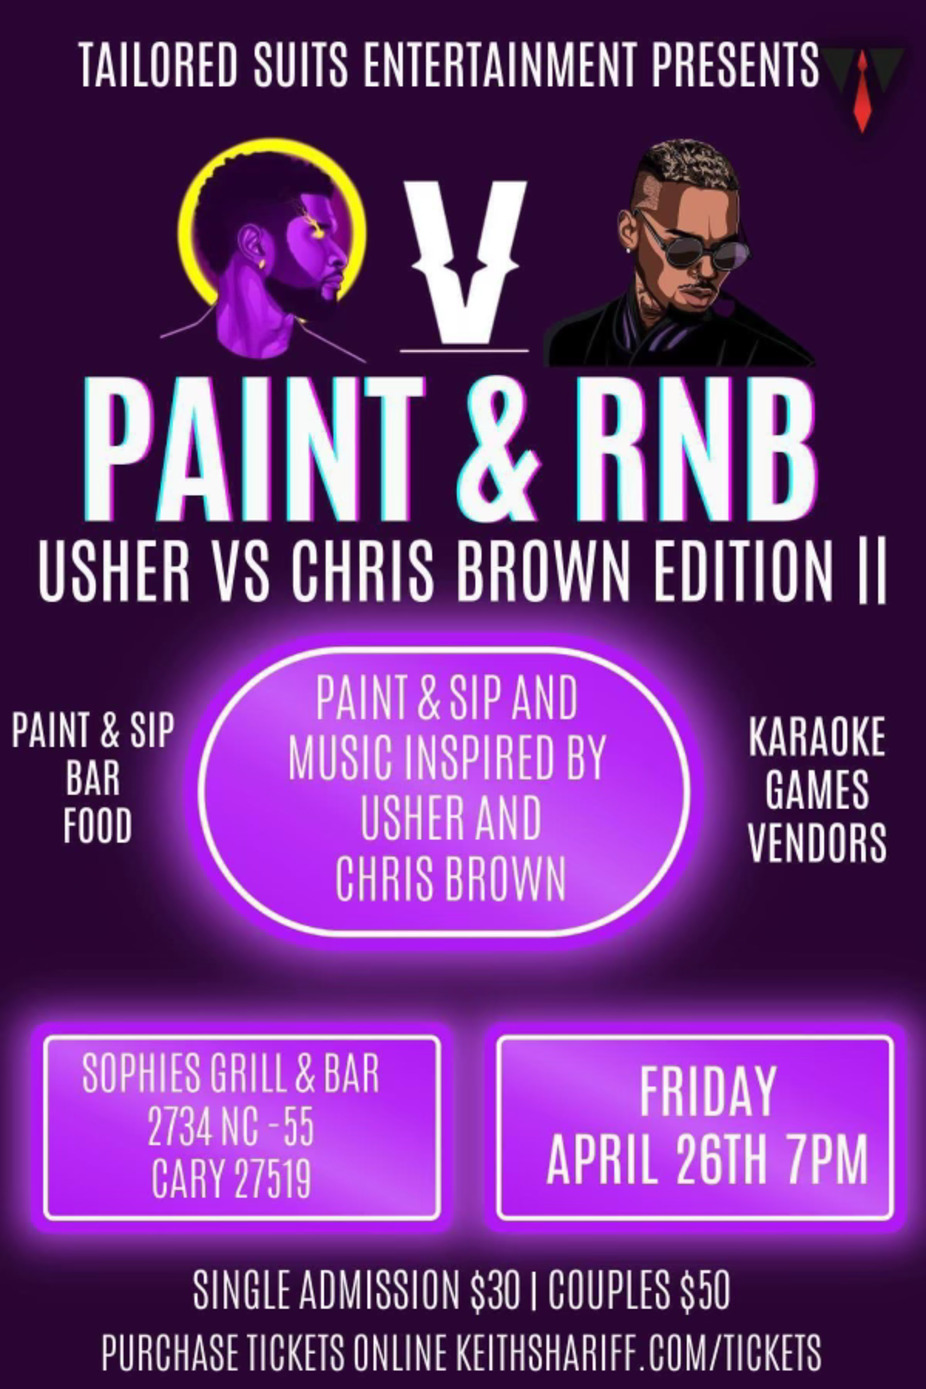 Paint and RNB event photo